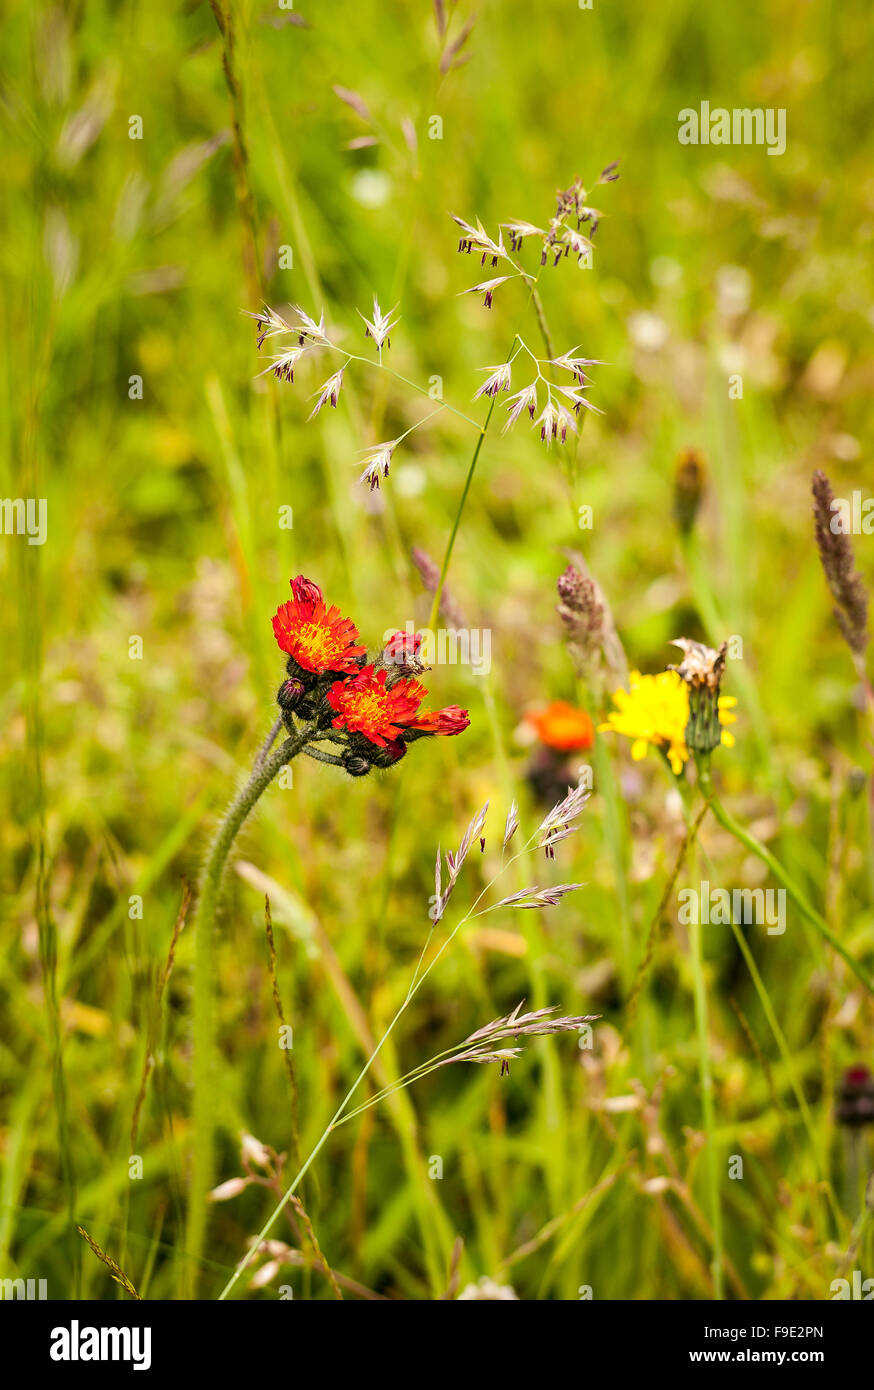 Wild flowers in a lawn - Fox and Cubs Stock Photo